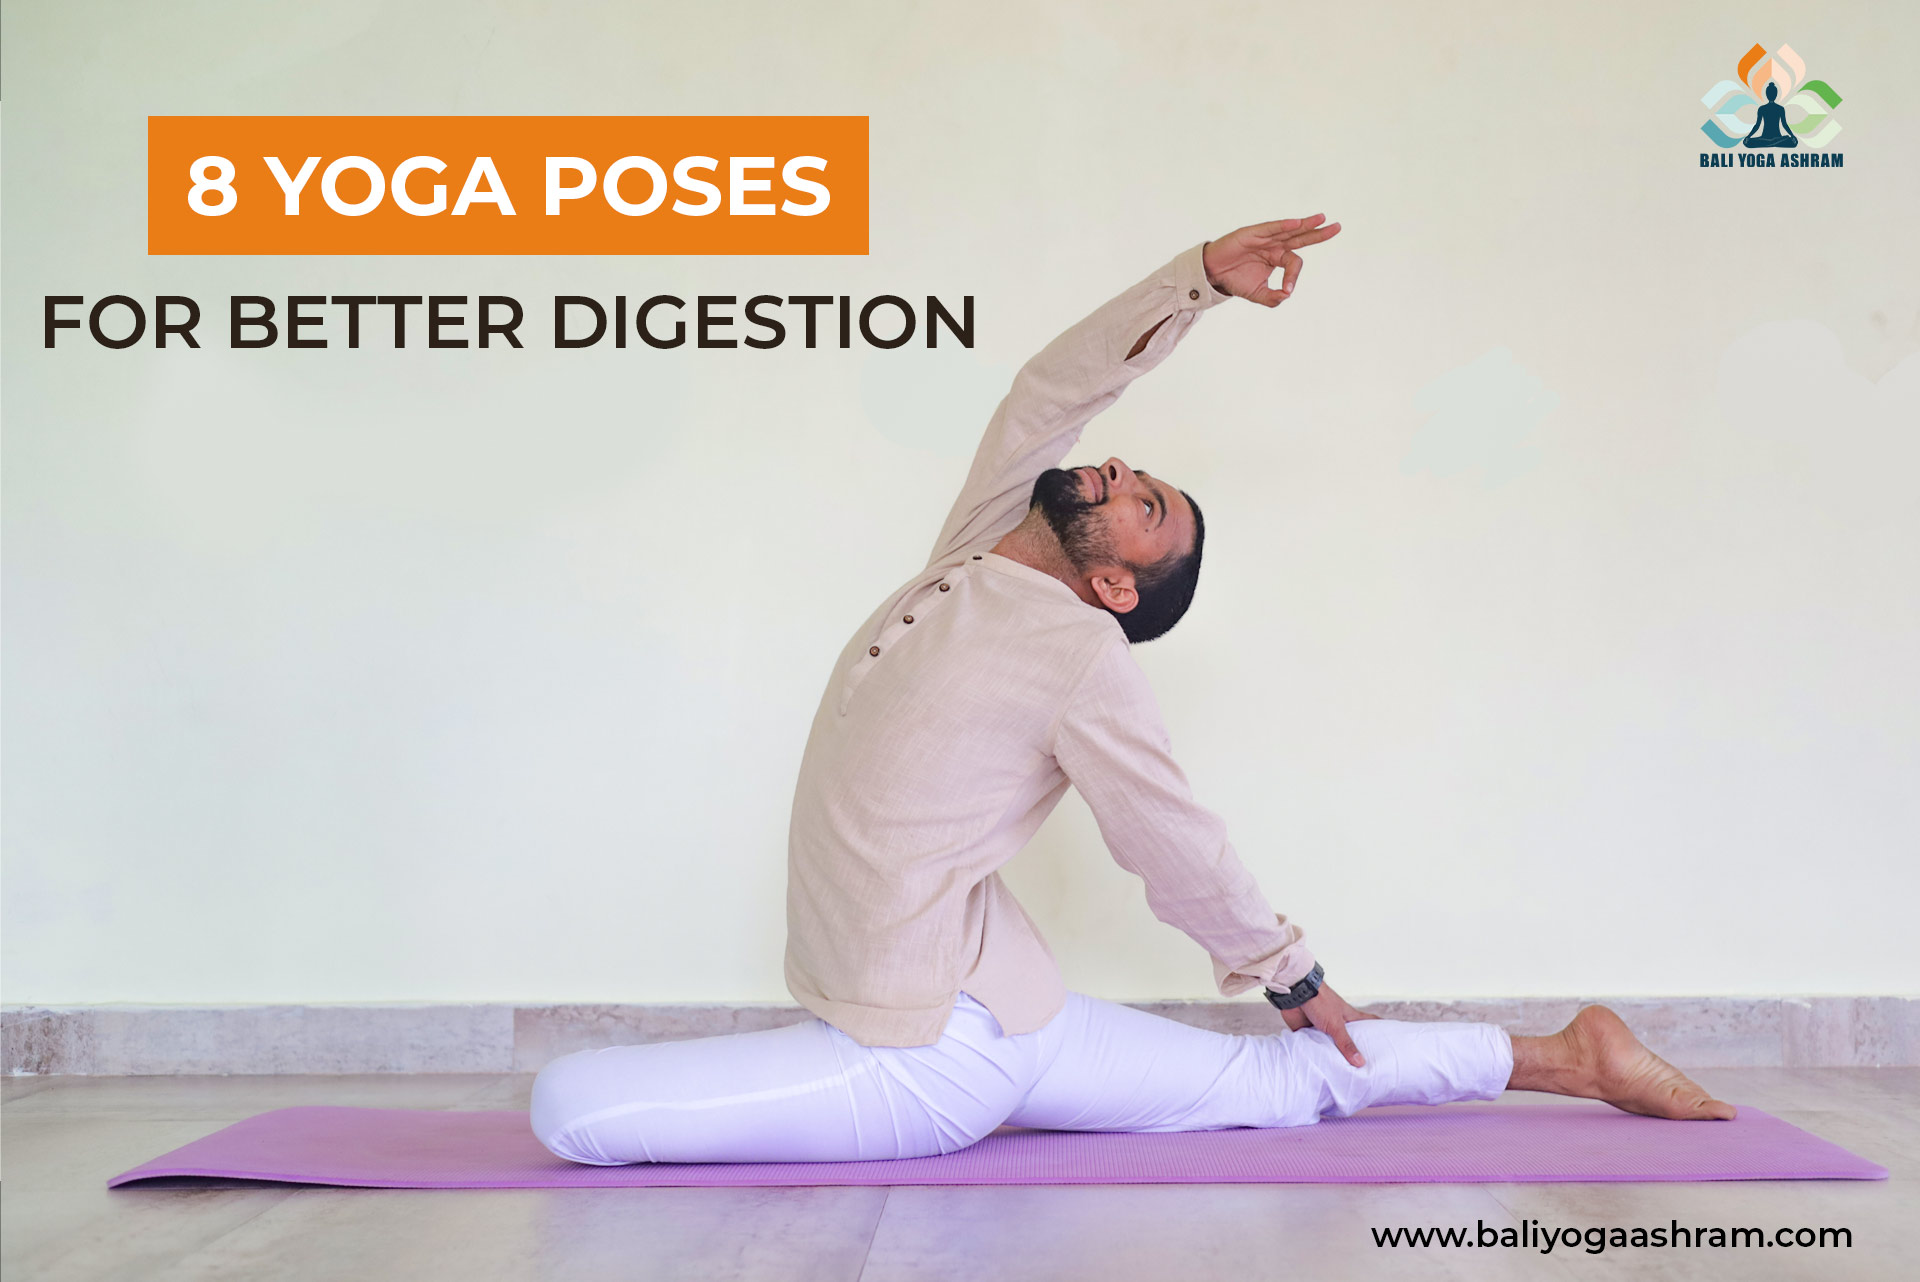 What yoga poses help to reduce gas problems and digestive issues? - Quora